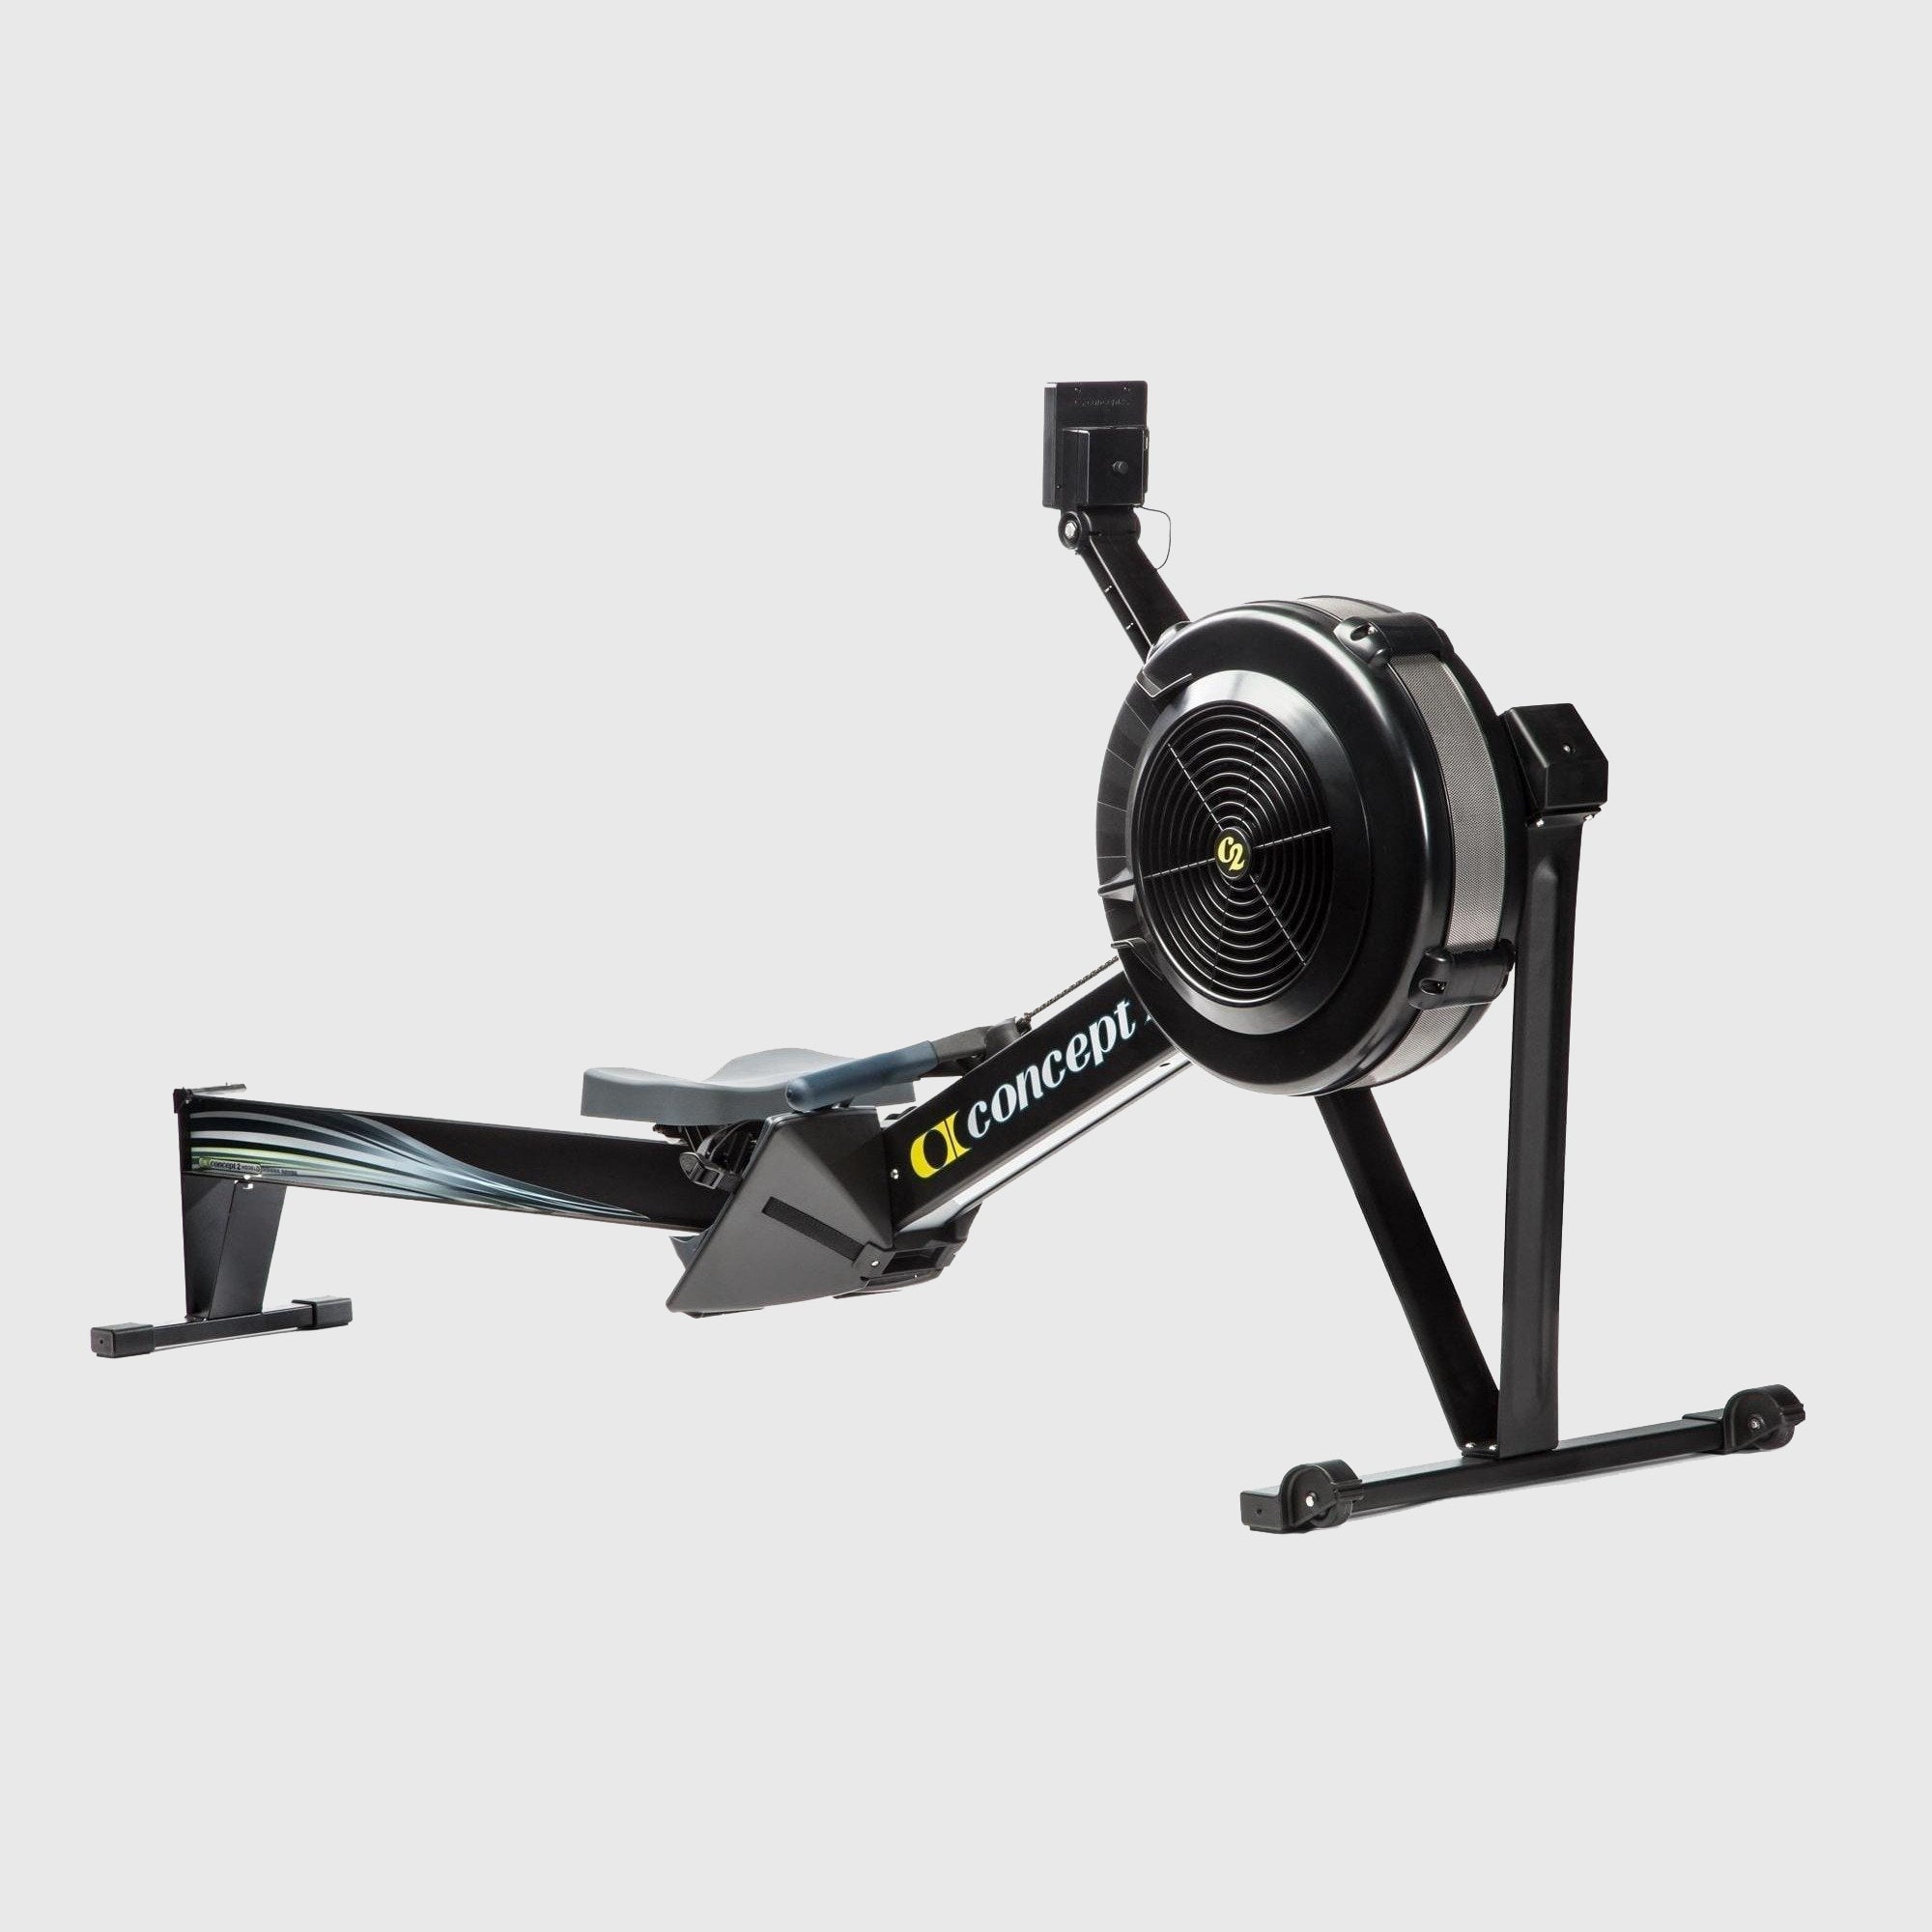 Concept 2 Rower Machine with PM5 monitor BLK BOX